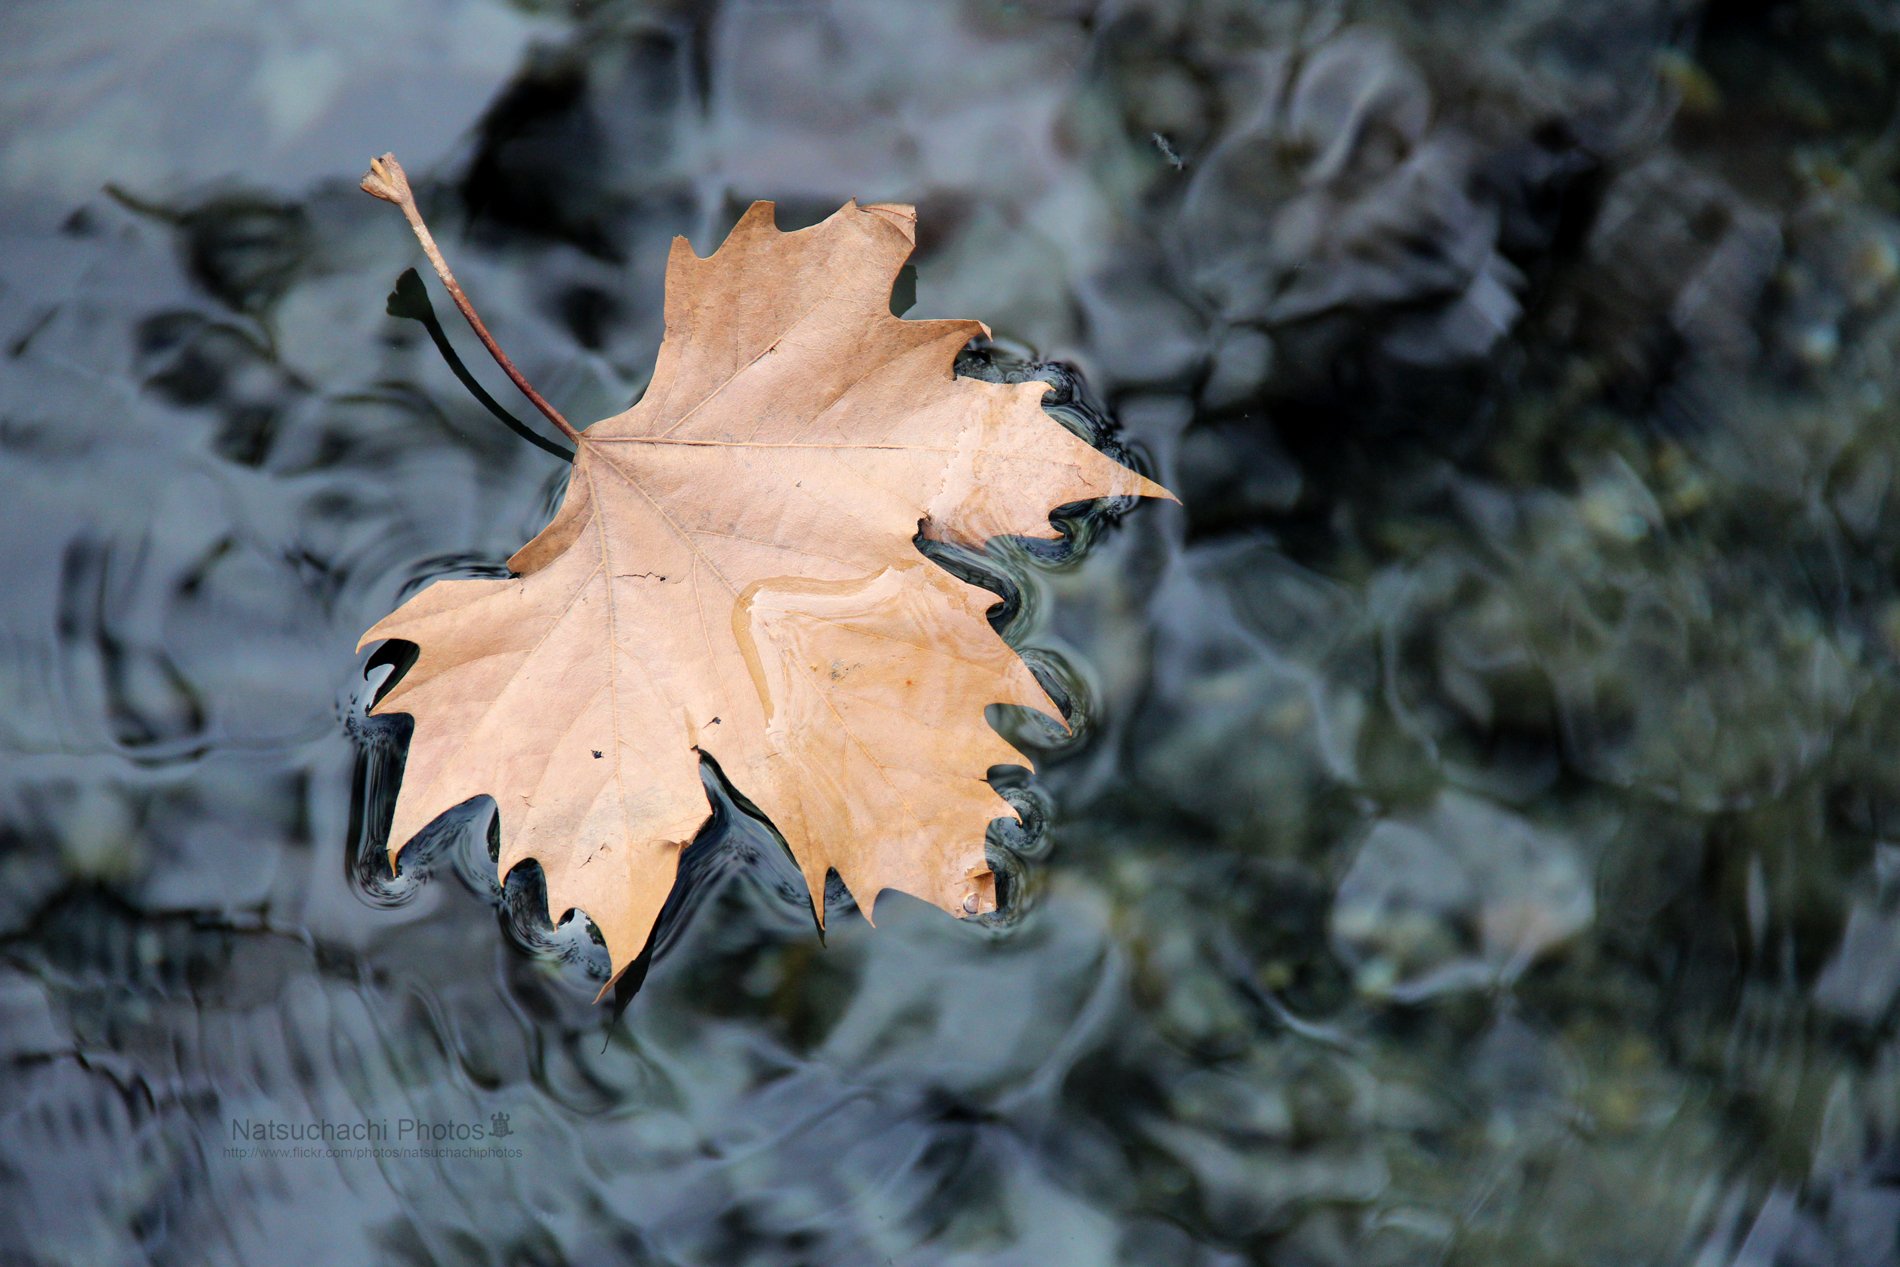 automne, Season, Nature, Landscapes, Rain, Fall, Wallpapers, Leaf, Tree, Campaign, Wet Wallpaper